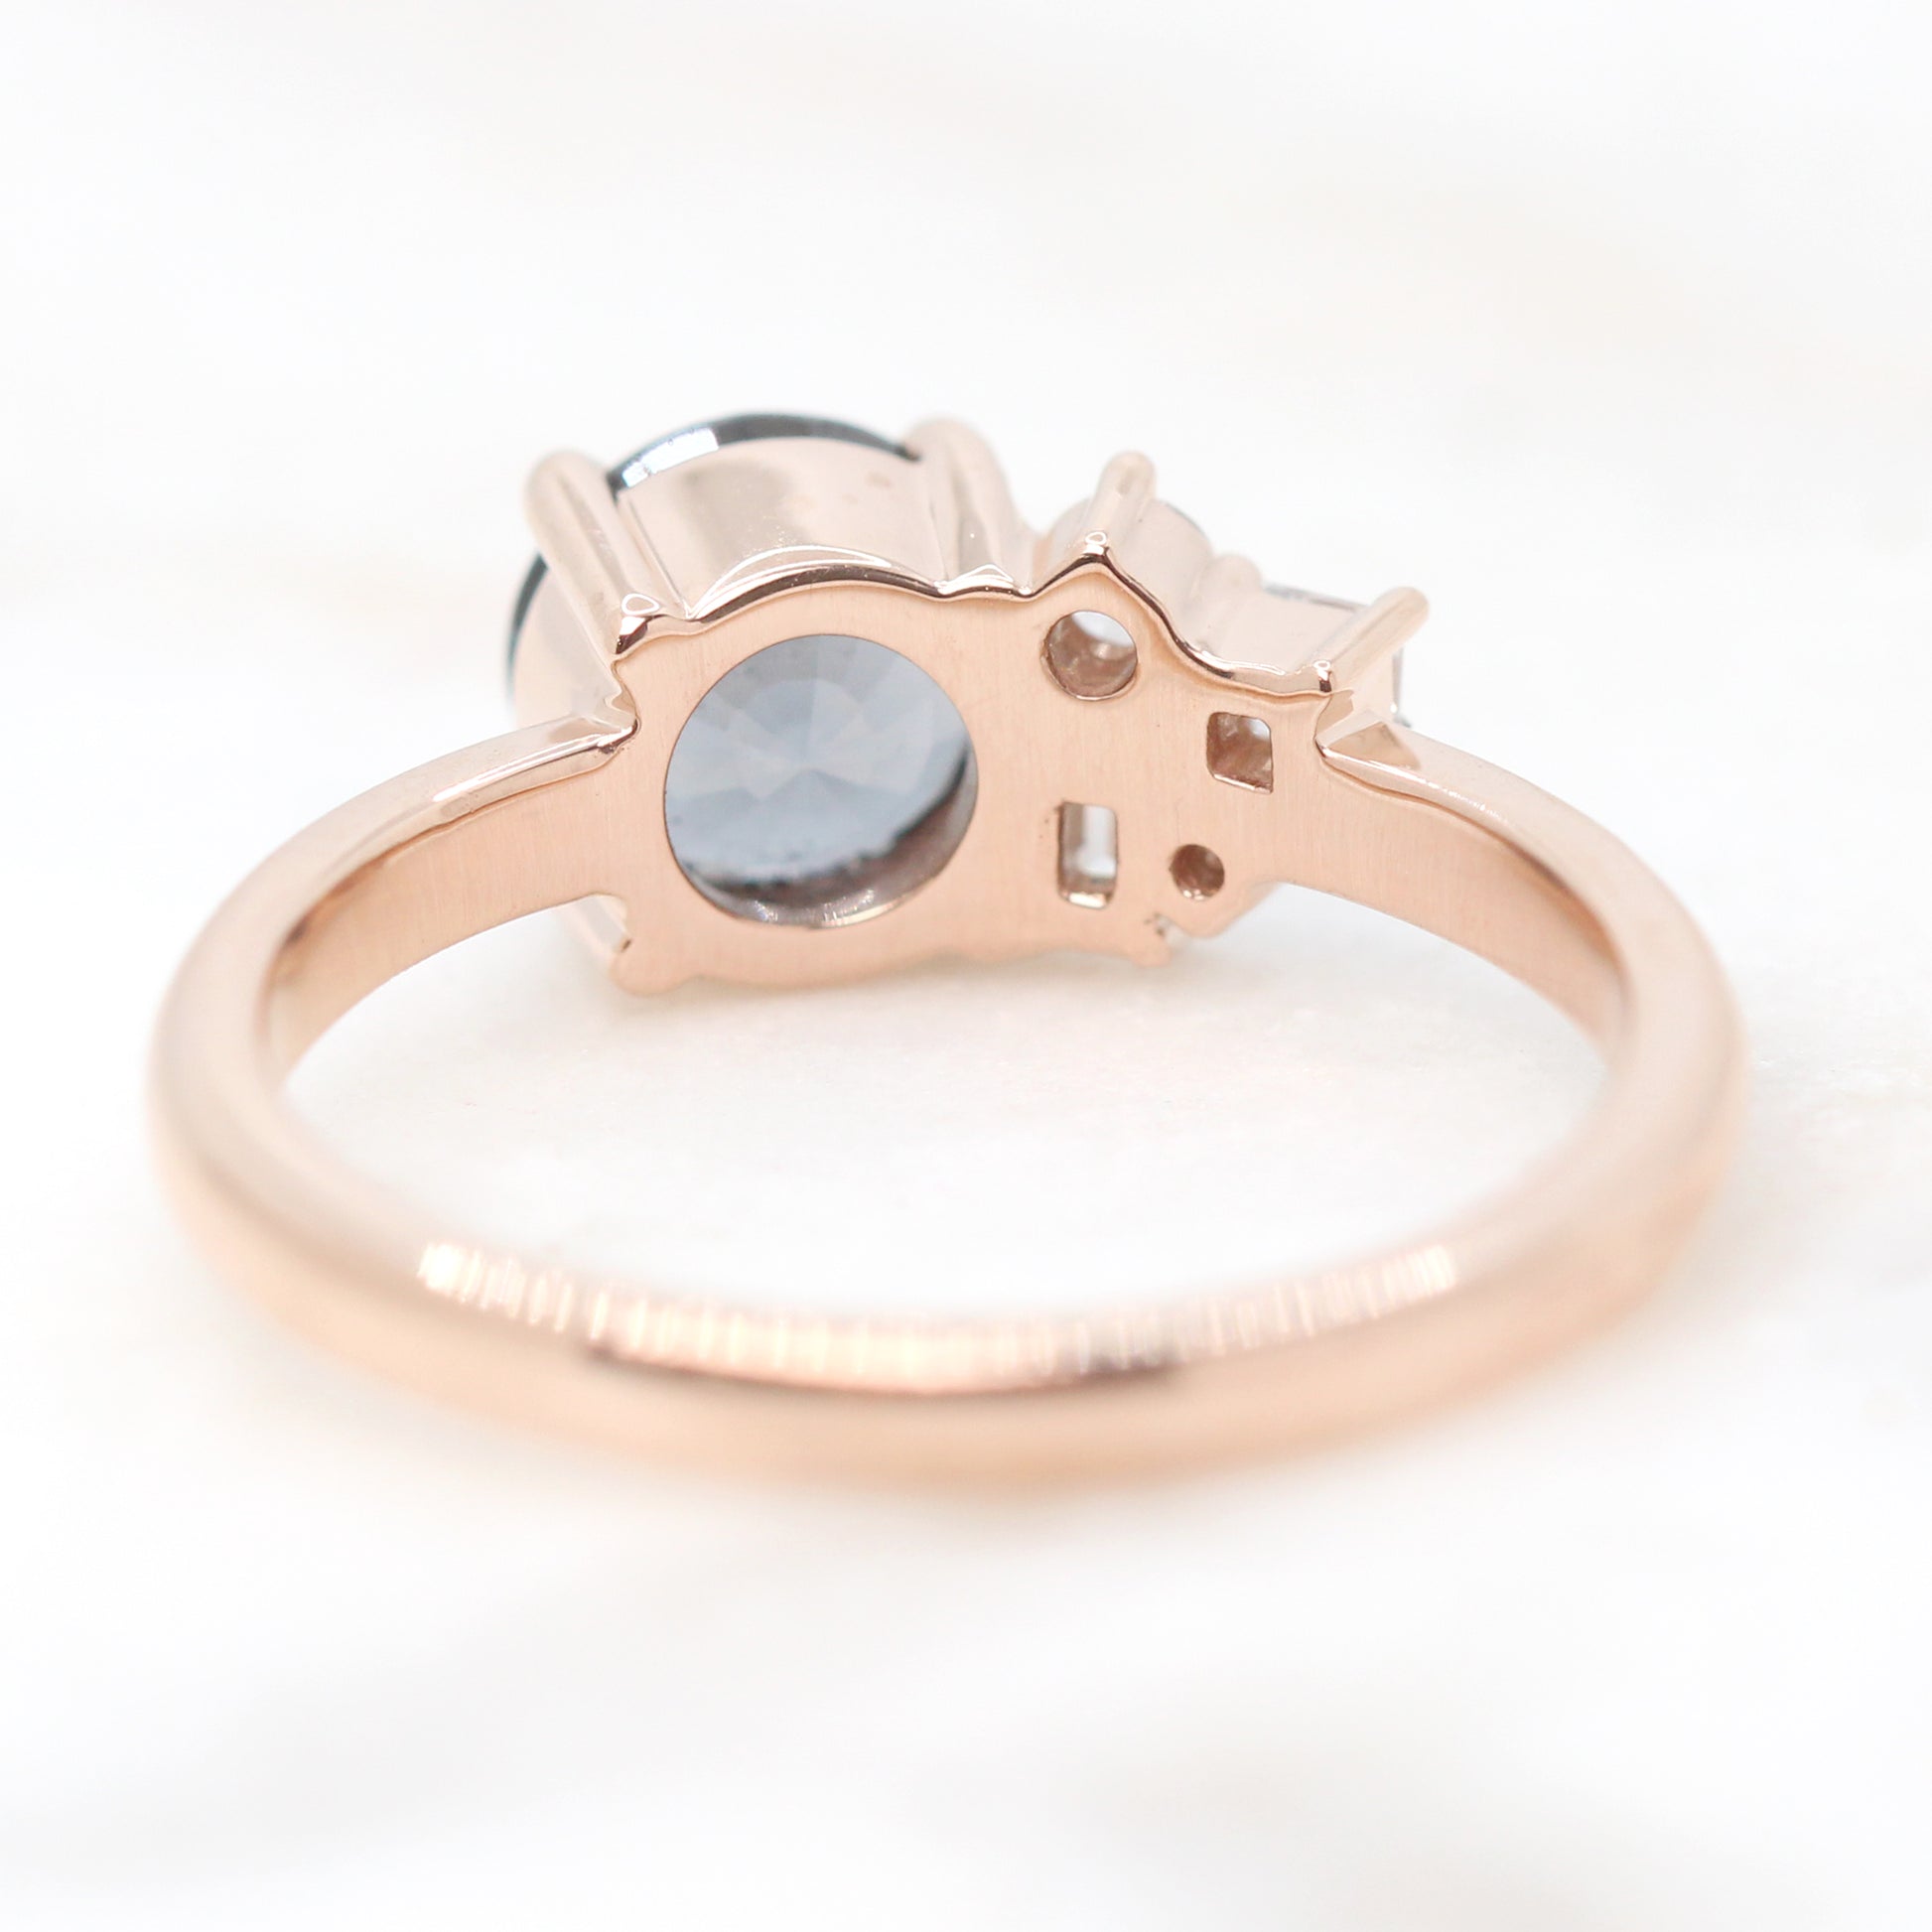 Abigail Ring with a 1.40 Carat Round Blue Gray Spinel and White Accent Diamonds in 14k Rose Gold - Ready to Size and Ship - Midwinter Co. Alternative Bridal Rings and Modern Fine Jewelry